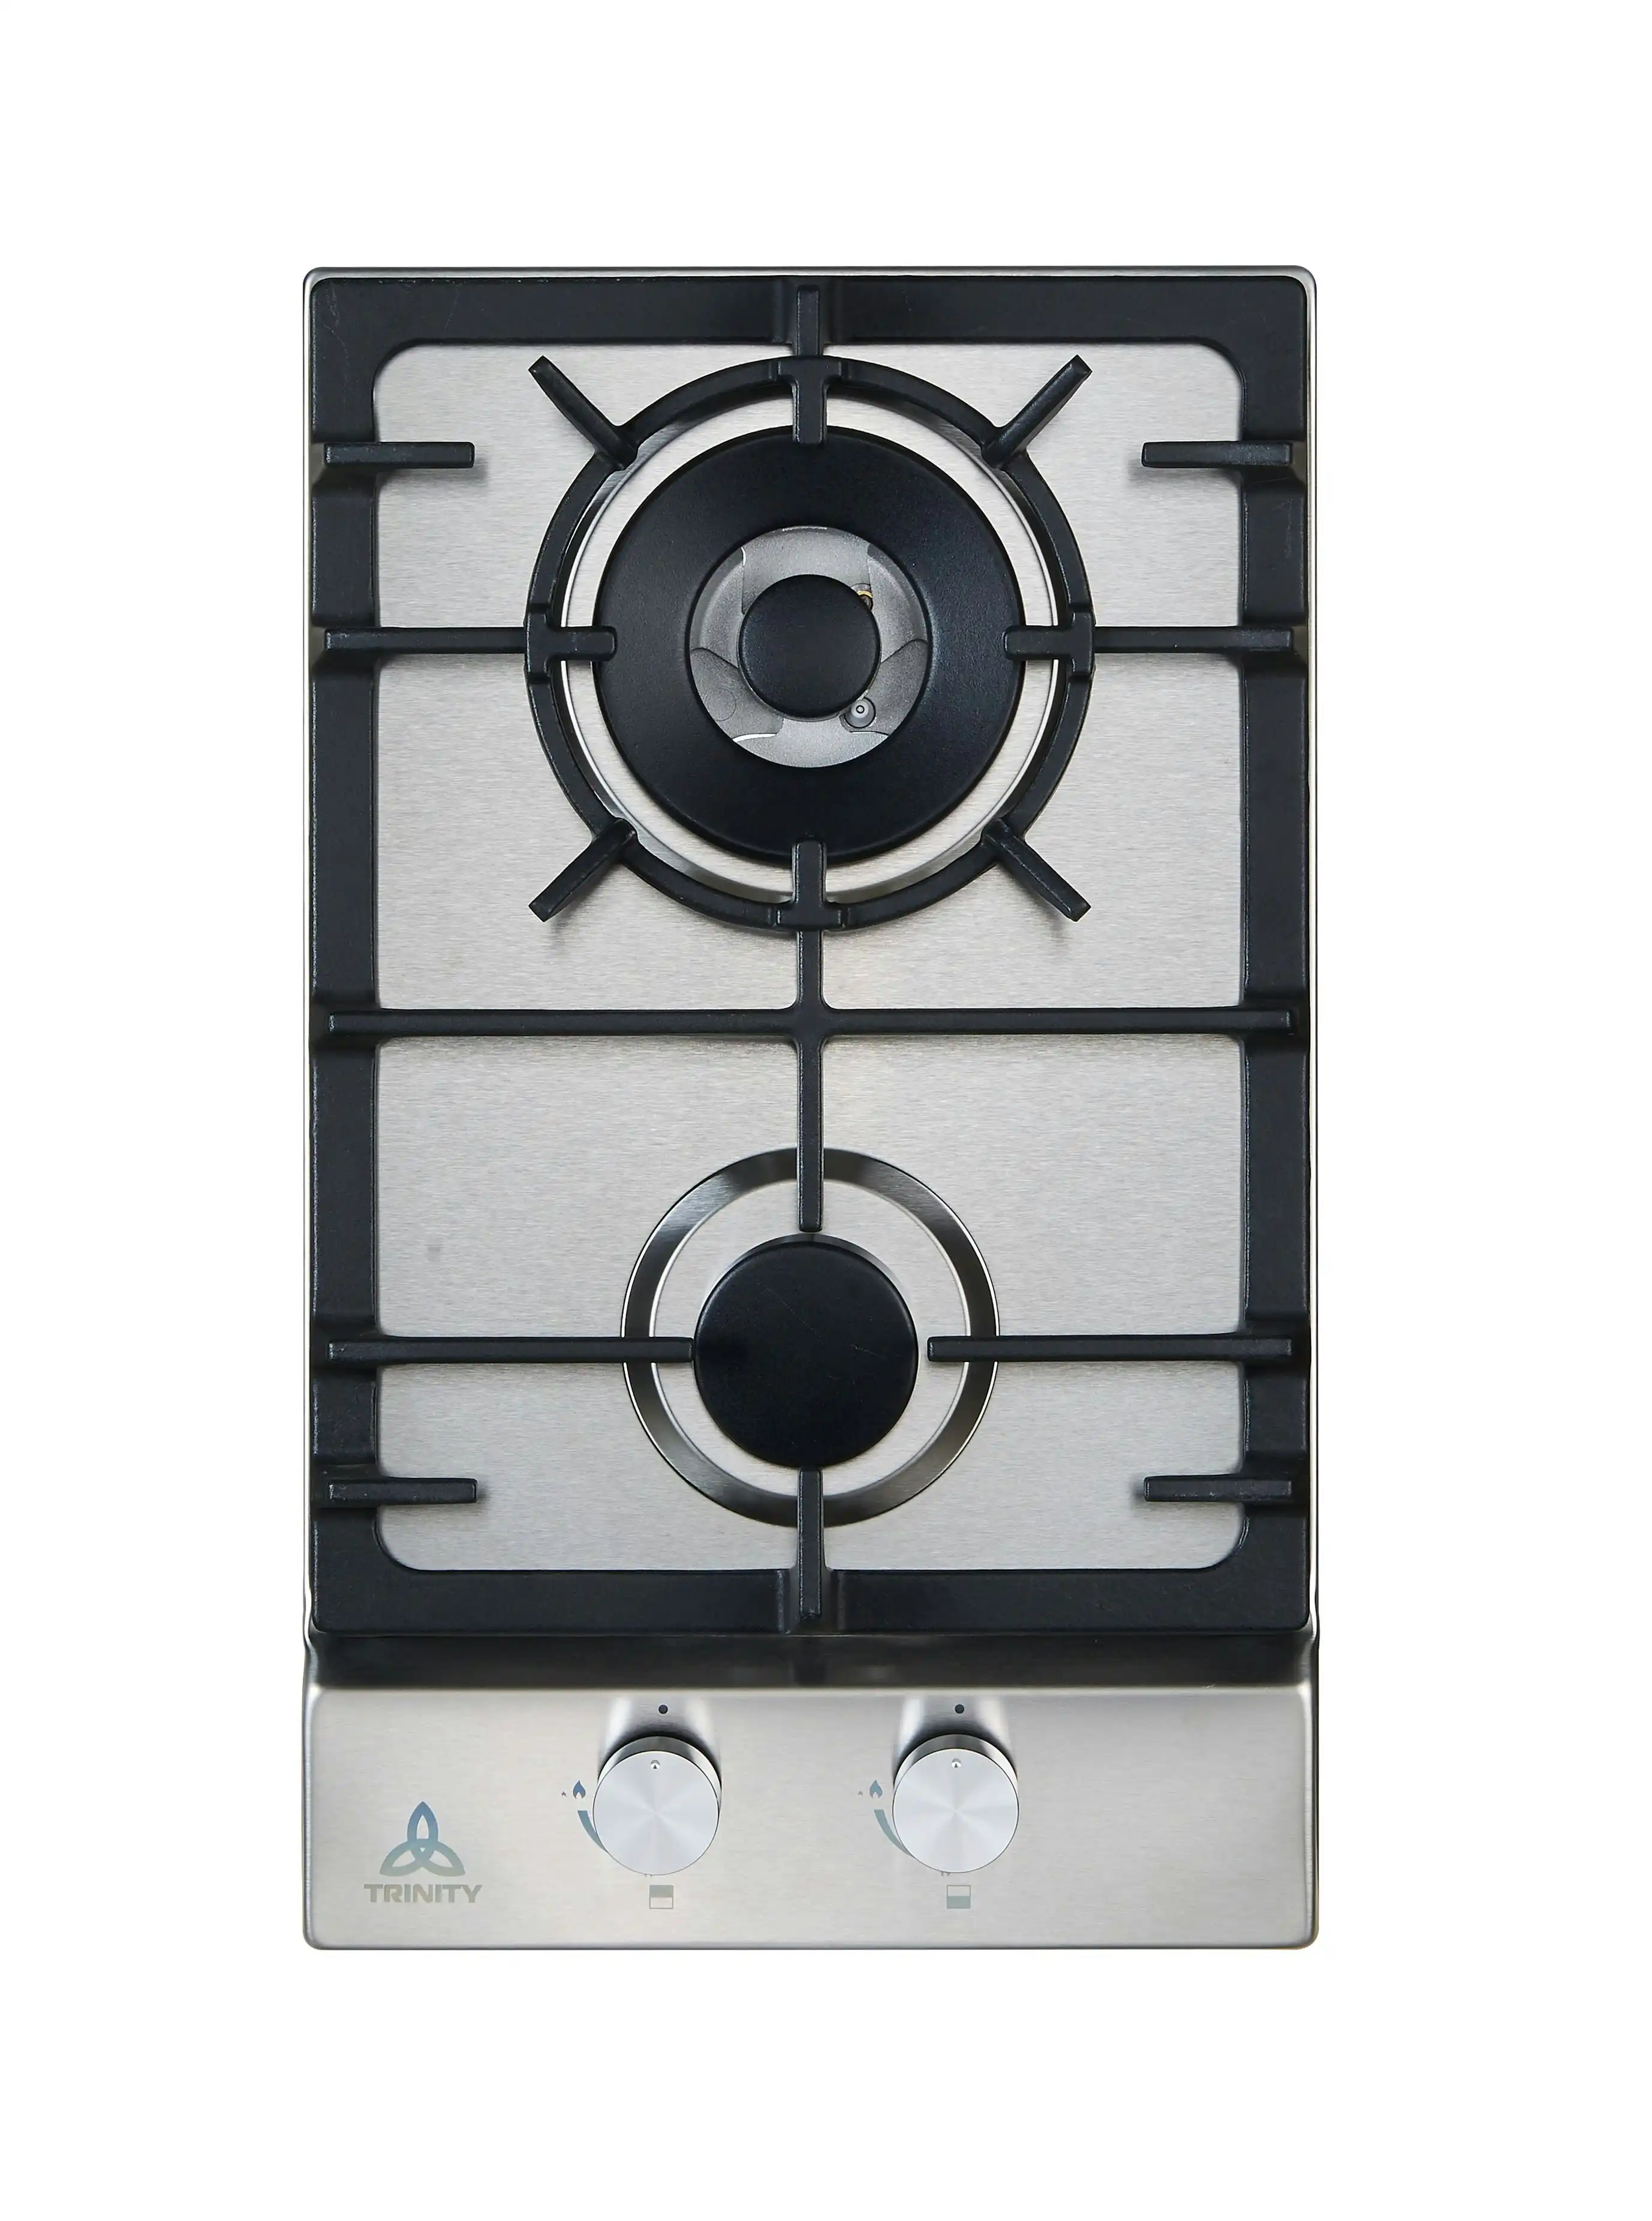 Trinity 30cm Gas Cooktop 2 Burners Stainless Steel